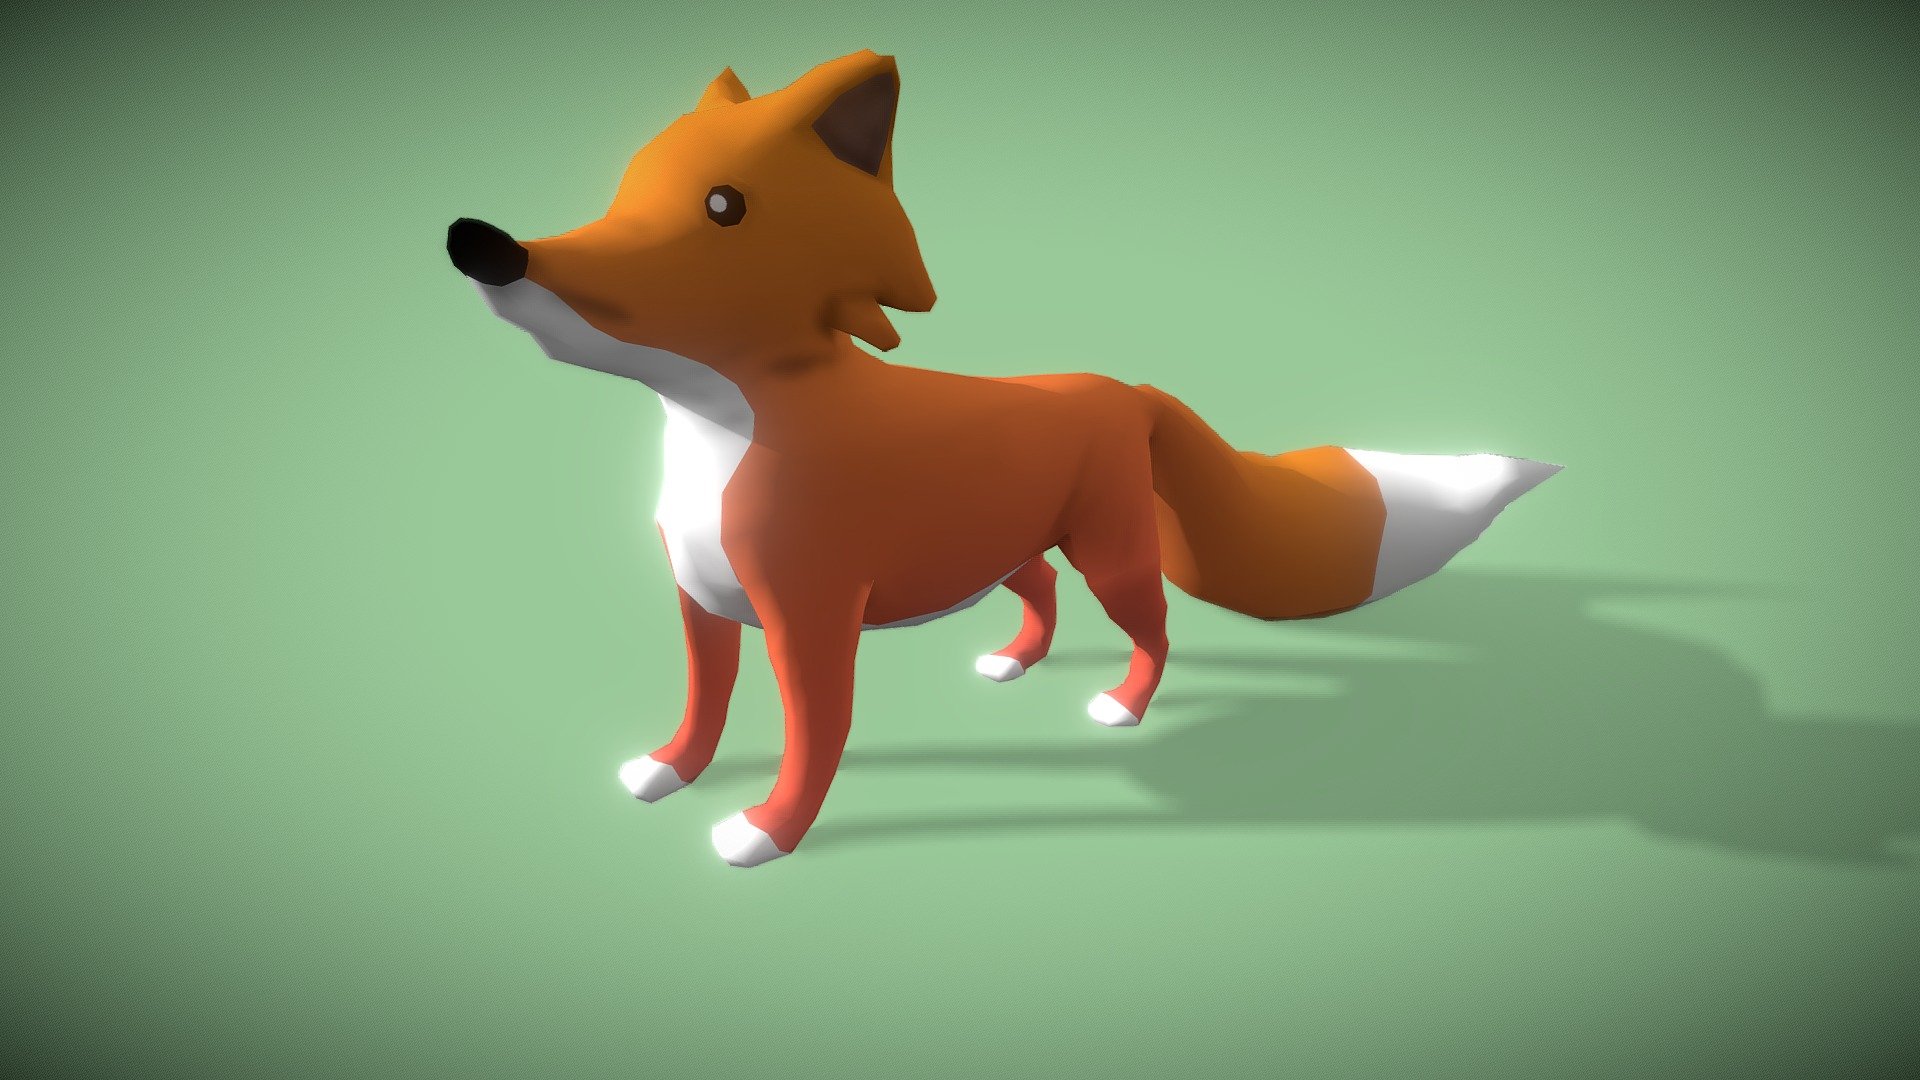 Animated Fox🦊

1 Looping idle animation
1 Looping run animation
1 Attack animation
1 Sitting idle animation
1 Dying animation
1 Blinking blendshape
Made with Blender

If you have any questions, contact me! - Low poly animated Cartoon Fox - 3D model by Blue Colossus Studio (@BlueColossus) 3d model